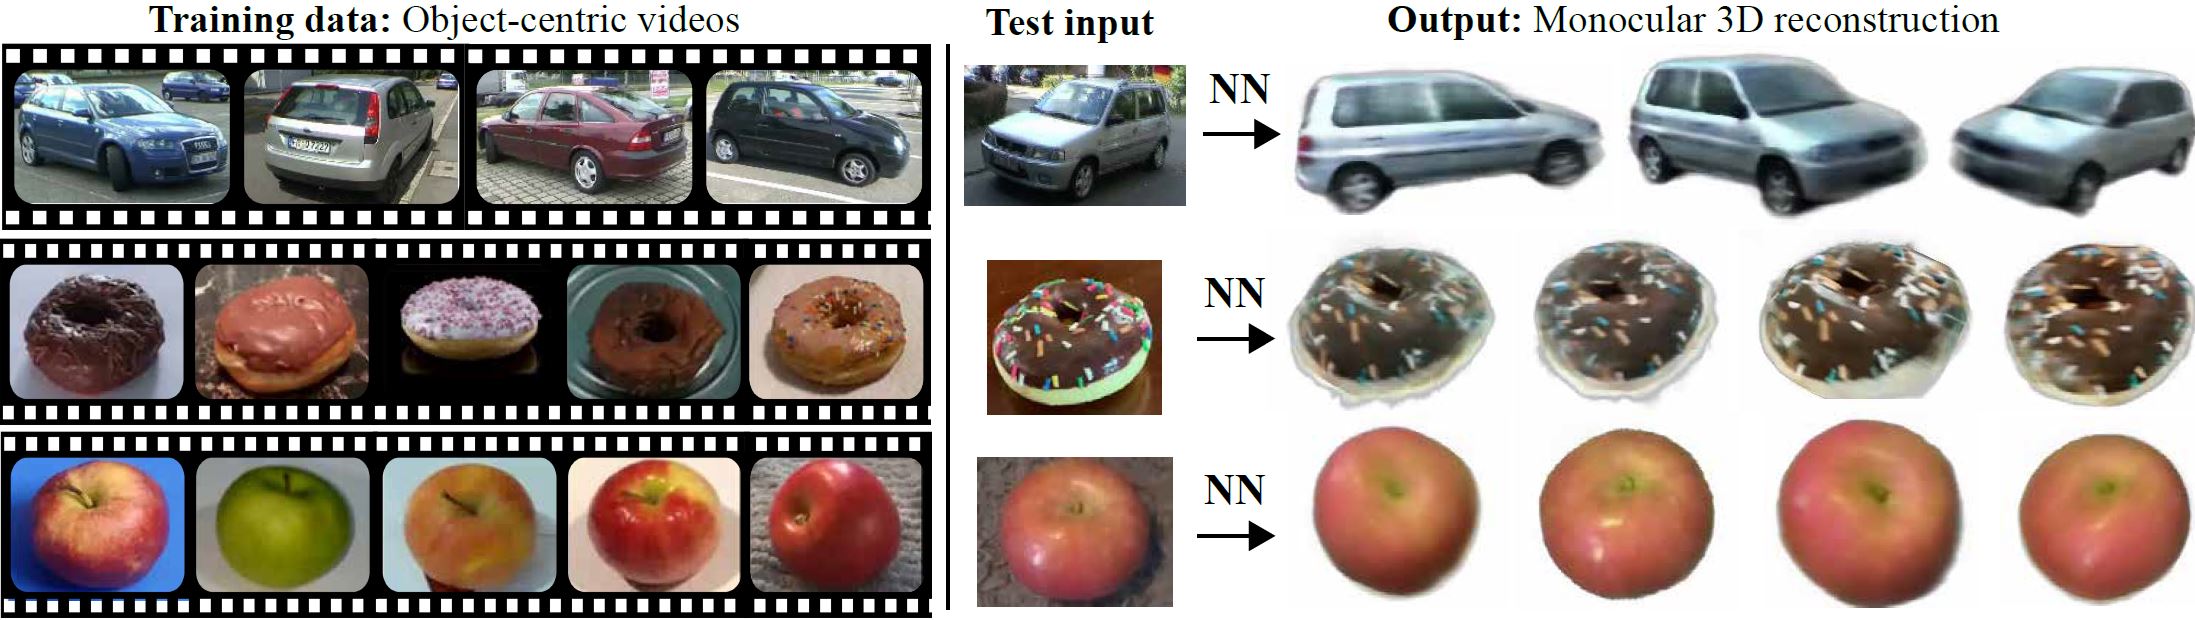 Unsupervised Learning of 3D Object Categories from Videos in the Wild